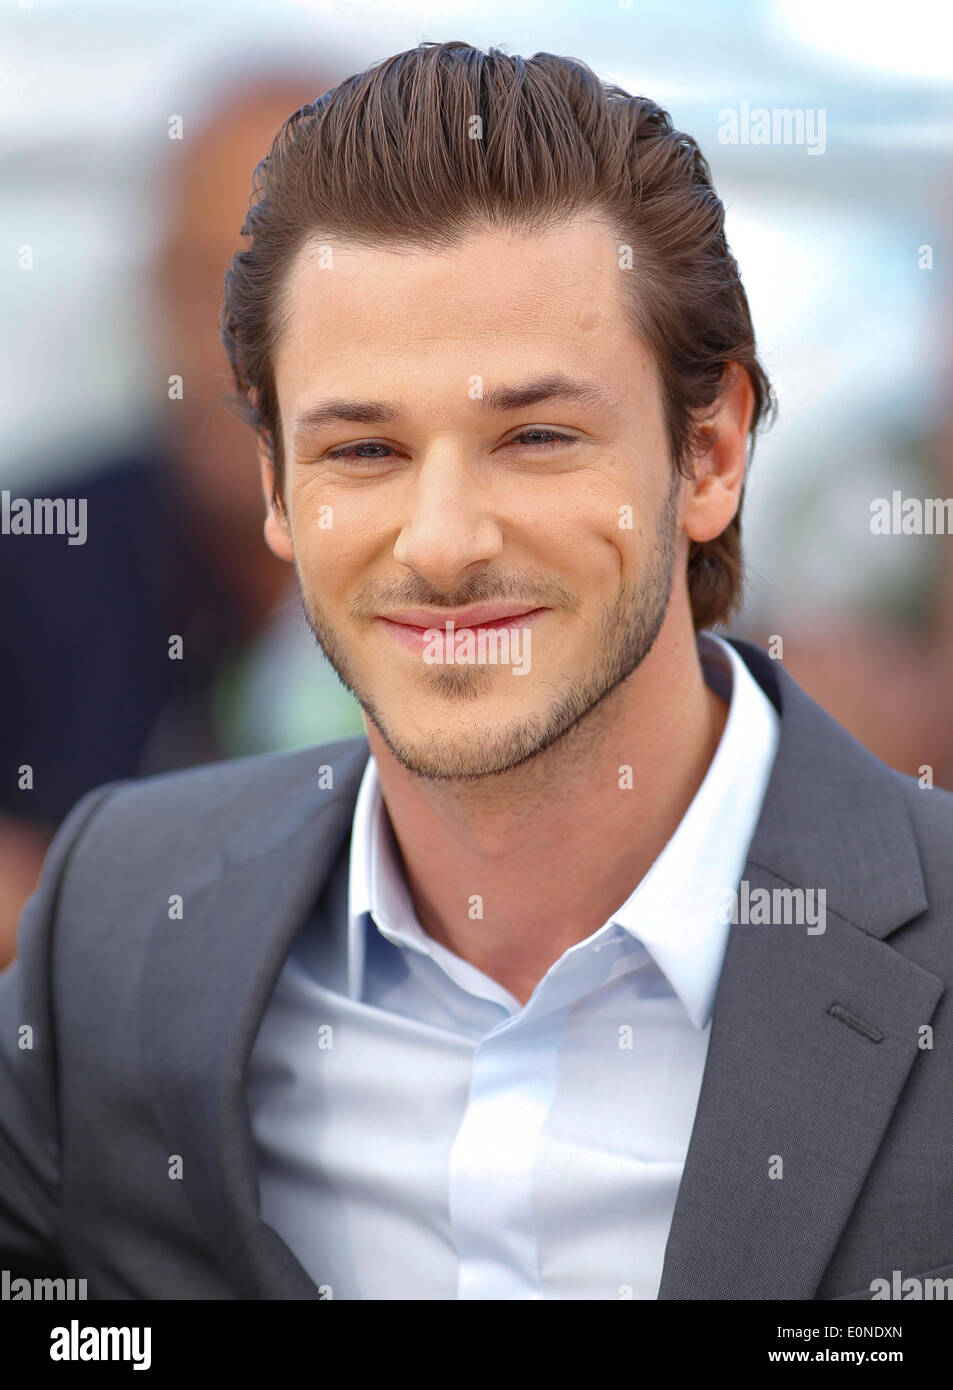 GASPARD ULLIEL SAINT-LAURENT PHOTOCALL. 67TH CANNES FILM FESTIVAL CANNES  FRANCE 17 May 2014 Stock Photo - Alamy